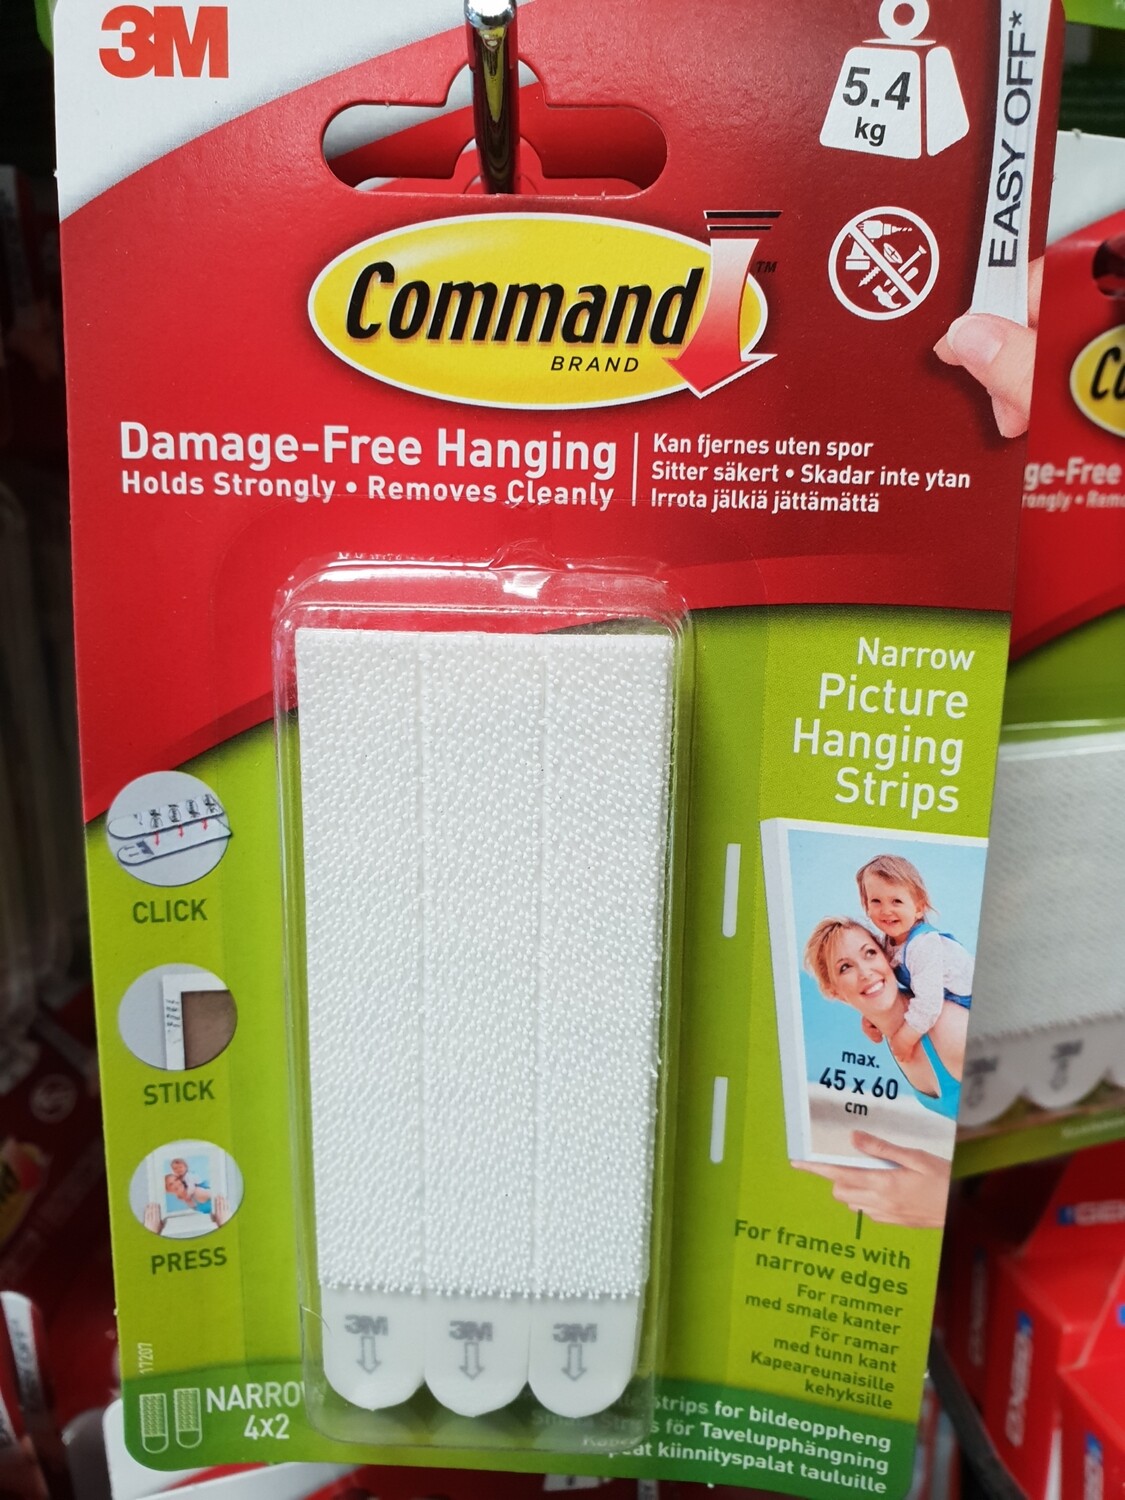 3M Command 5.4kg picture strips